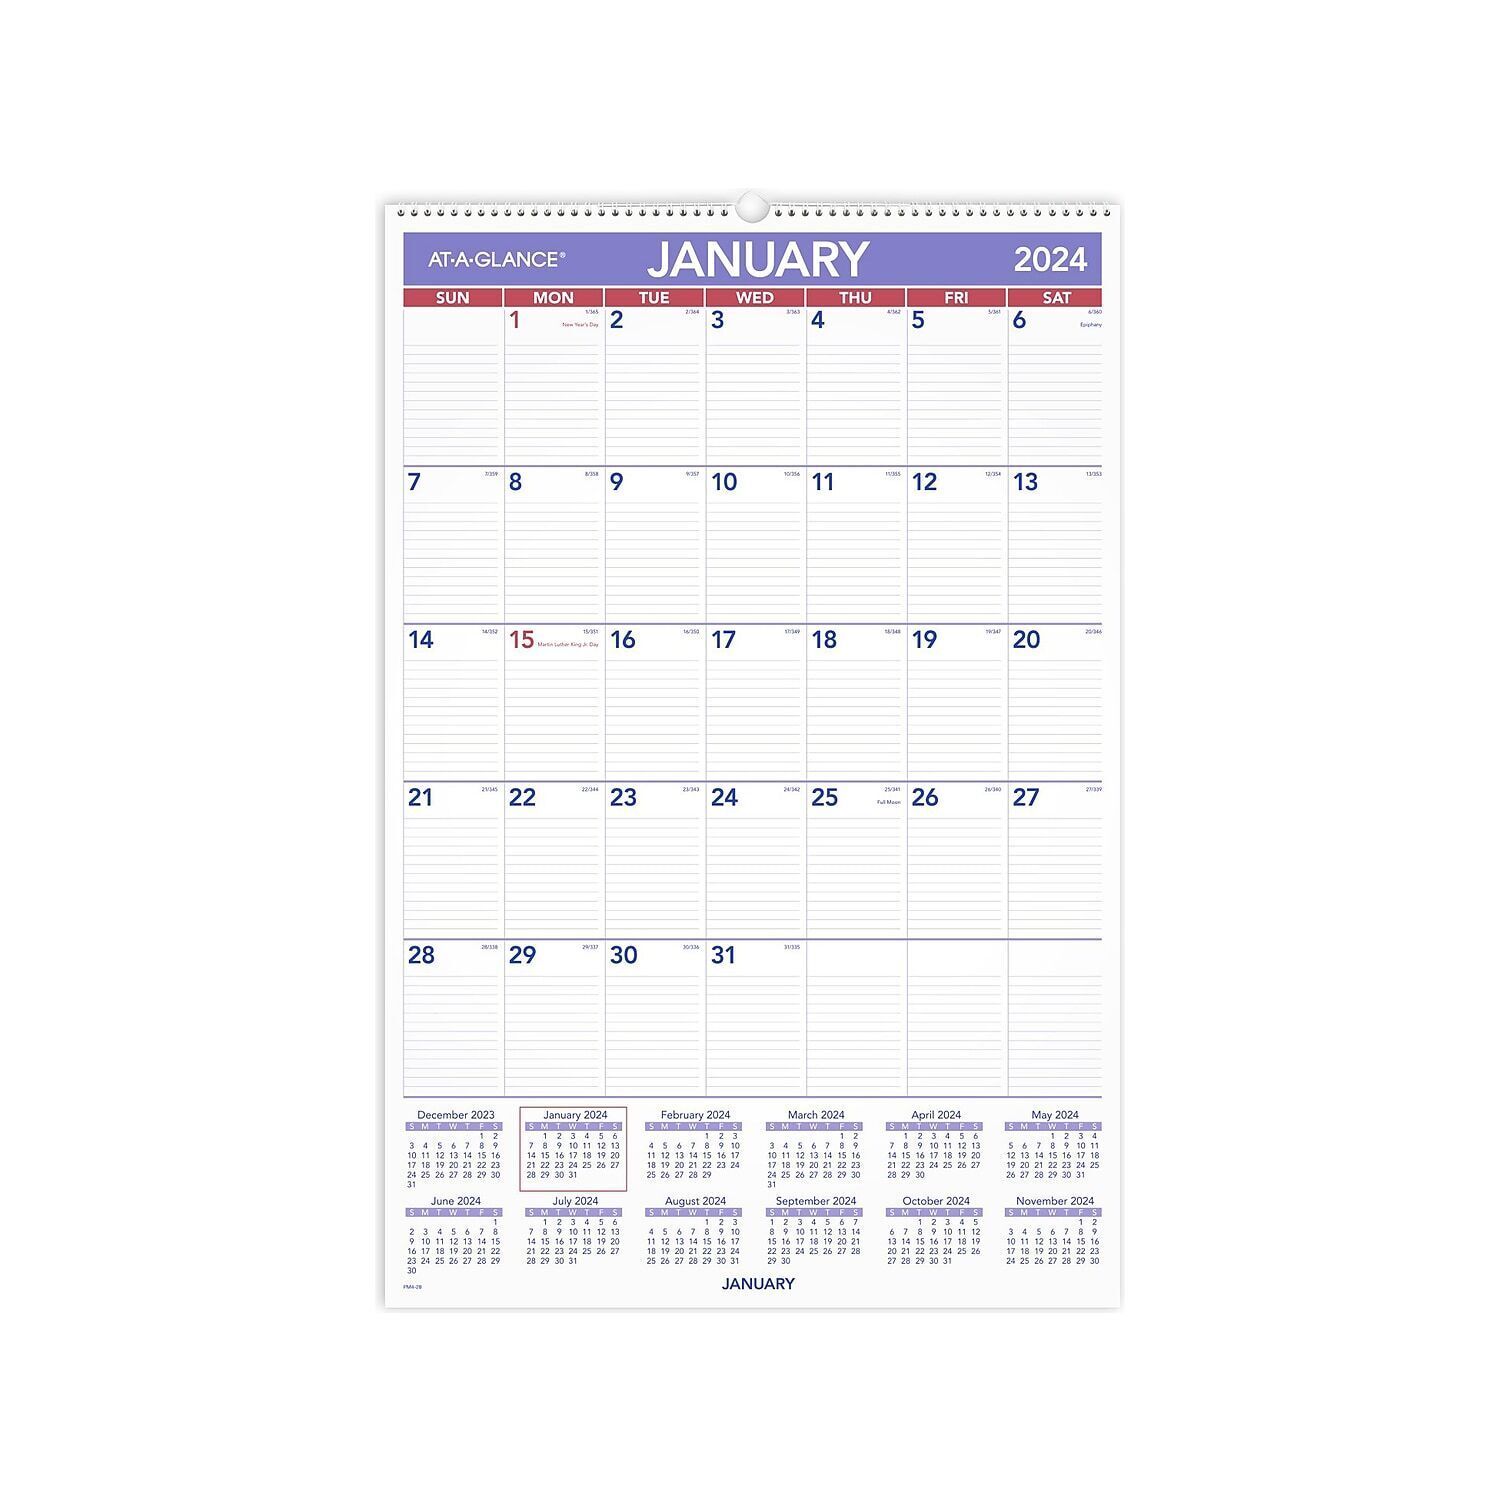 2024 AT-A-GLANCE 20" x 30" Monthly Wall Calendar (PM4-28-24) - $58.99